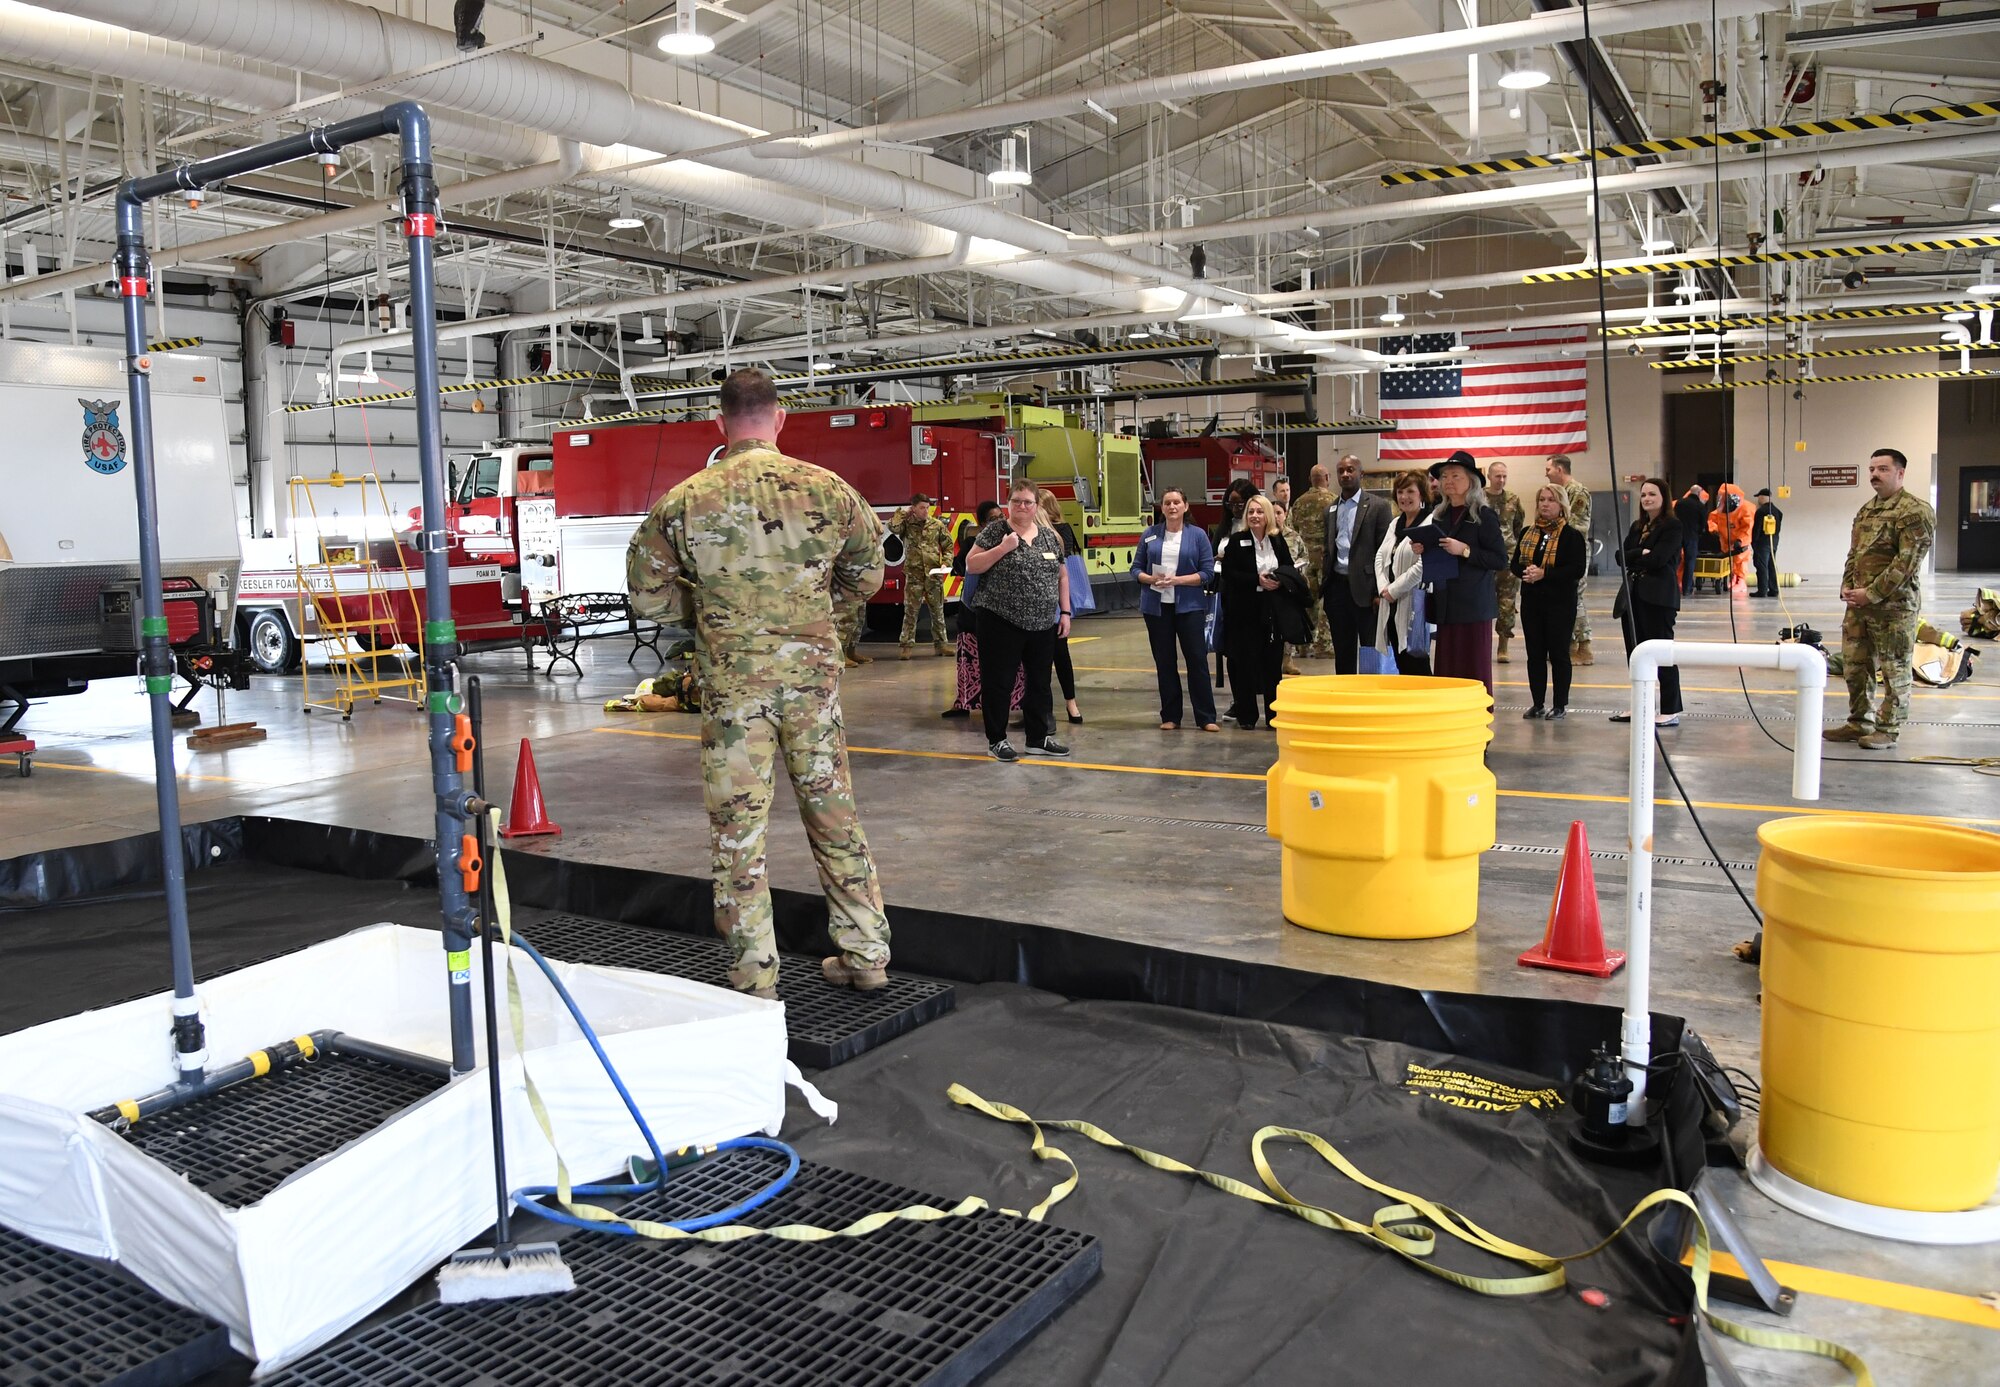 U.S. Air Force Master Sgt. Timothy McCutcheon, 81st Civil Engineer Squadron chief of operations assistant, provides a tour of the fire department bay to honorary commanders and civic leaders at Keesler Air Force Base, Mississippi, Feb. 17, 2023.